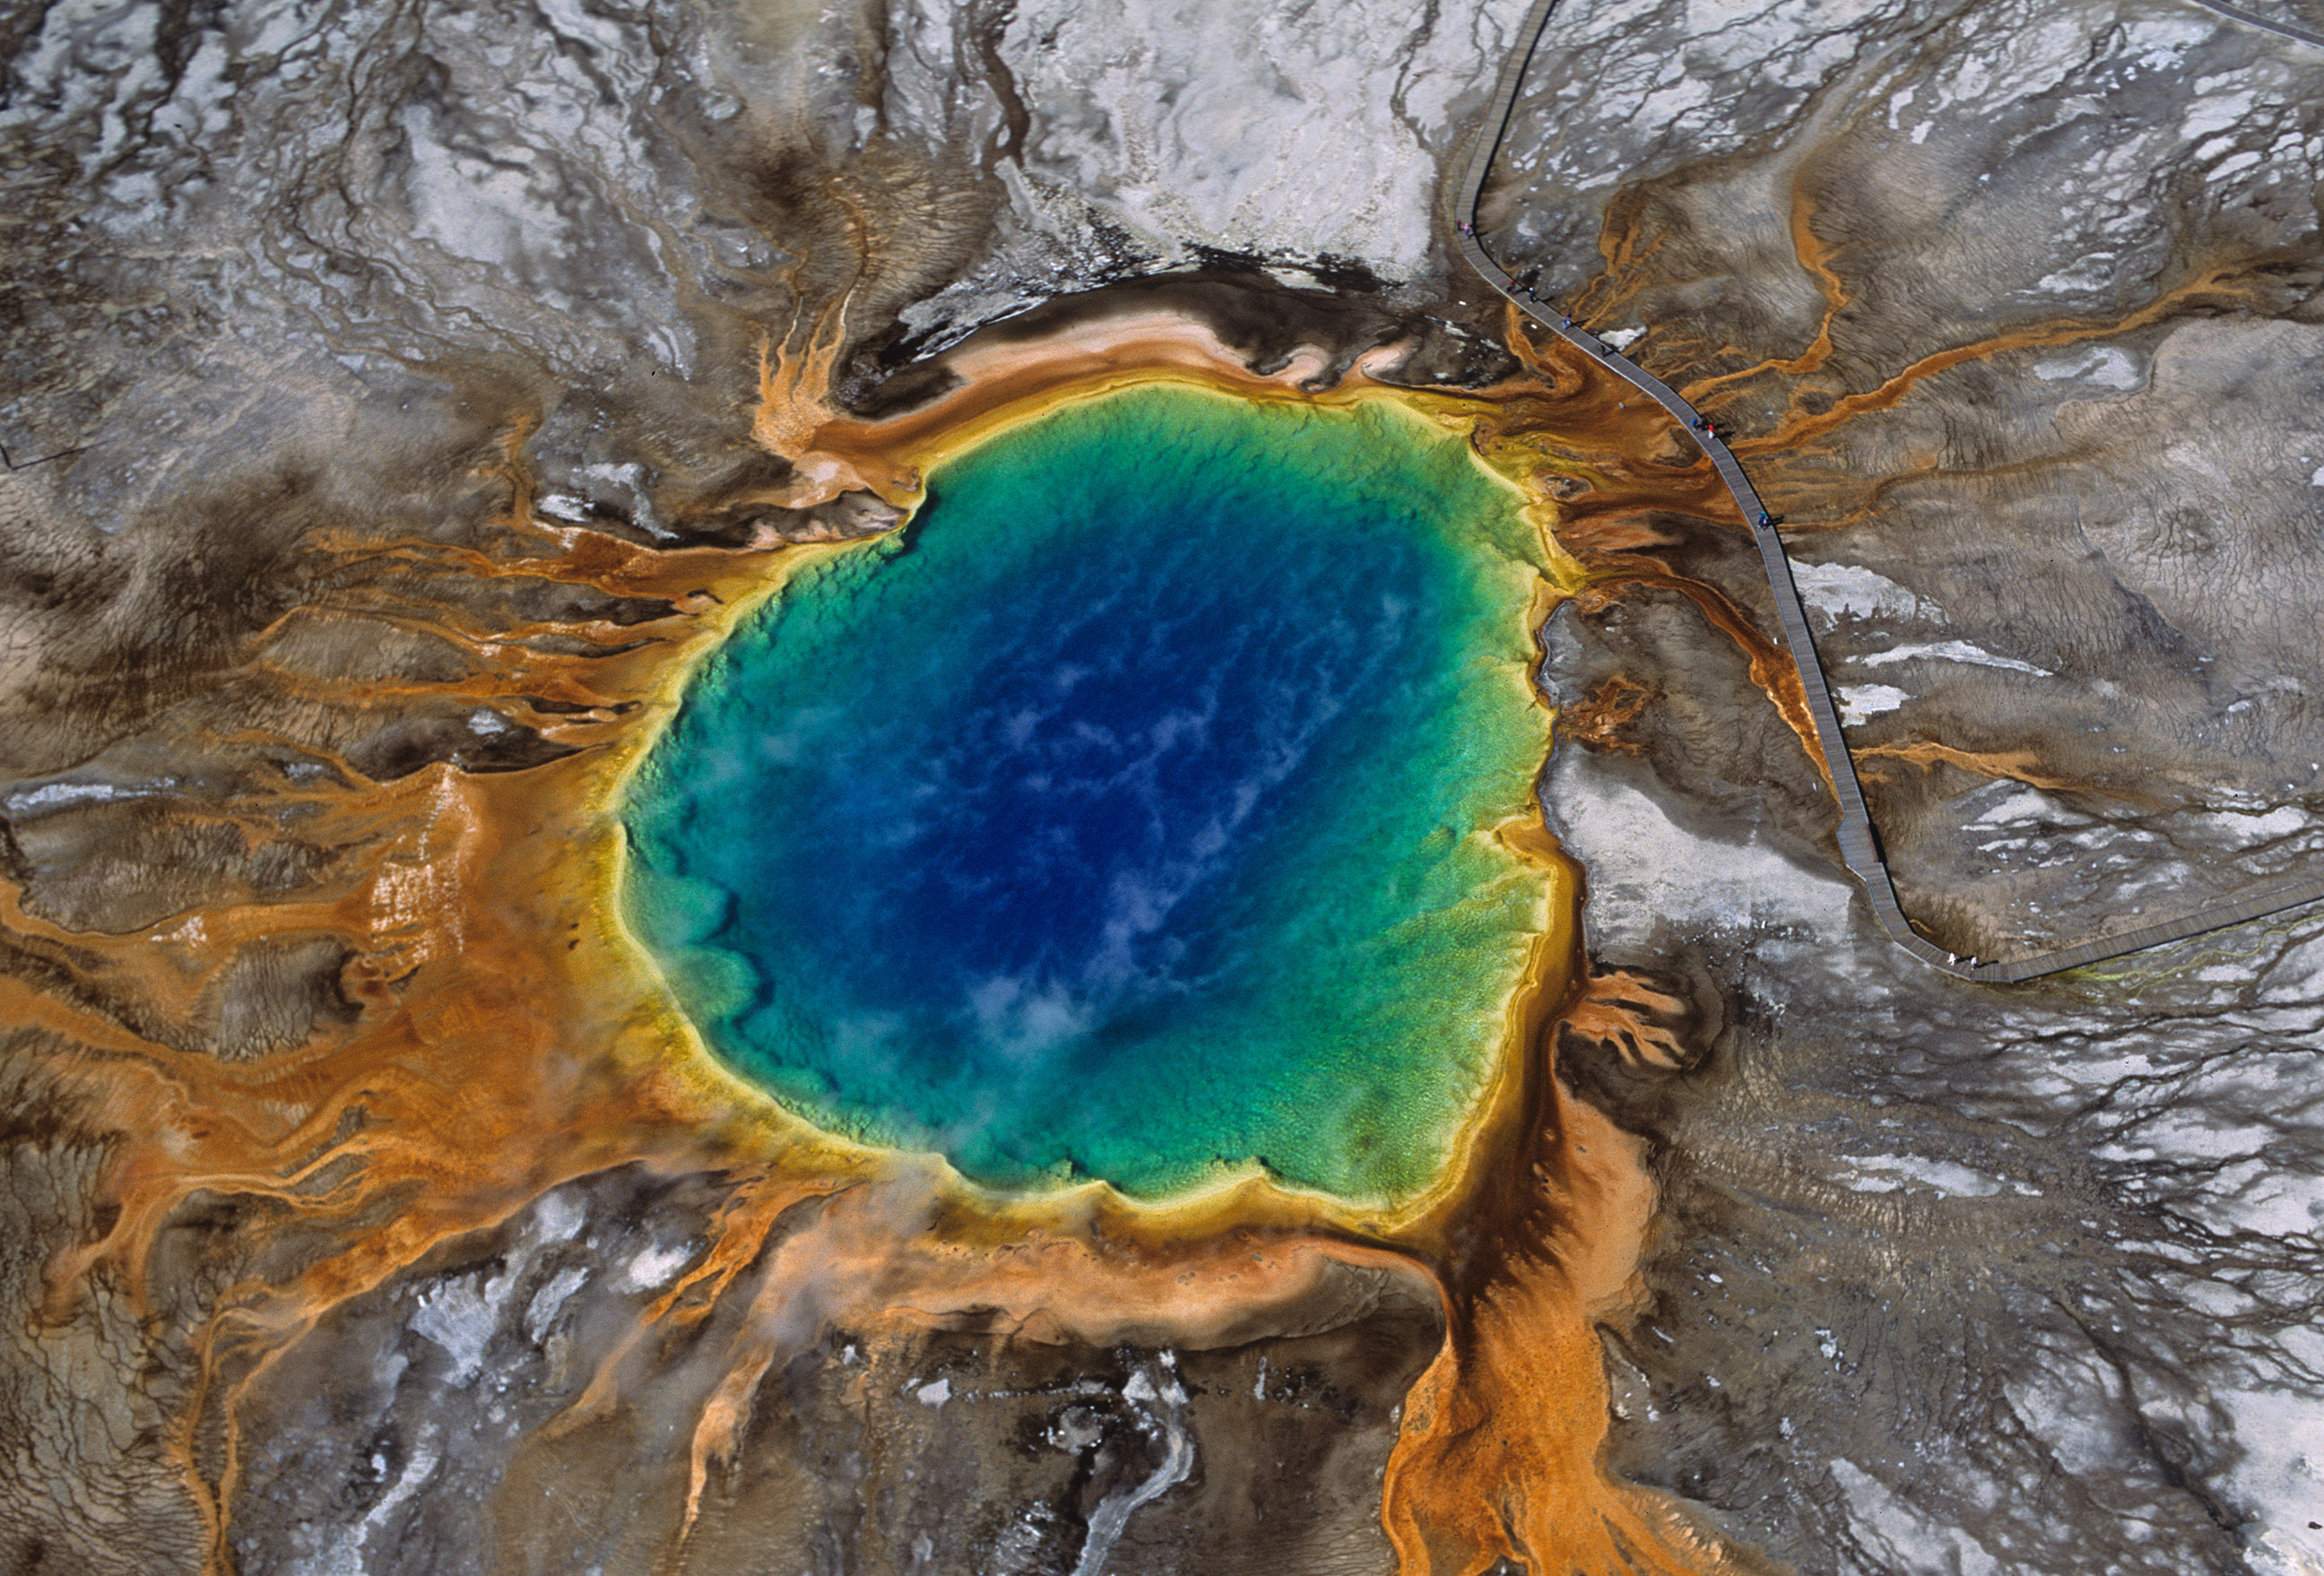 Grand Prismatic Spring, Yellowstone National Park, Wyoming. Photo courtesy Chris Mickey, Media & Public Relations Manager Wyoming Office of Tourism 